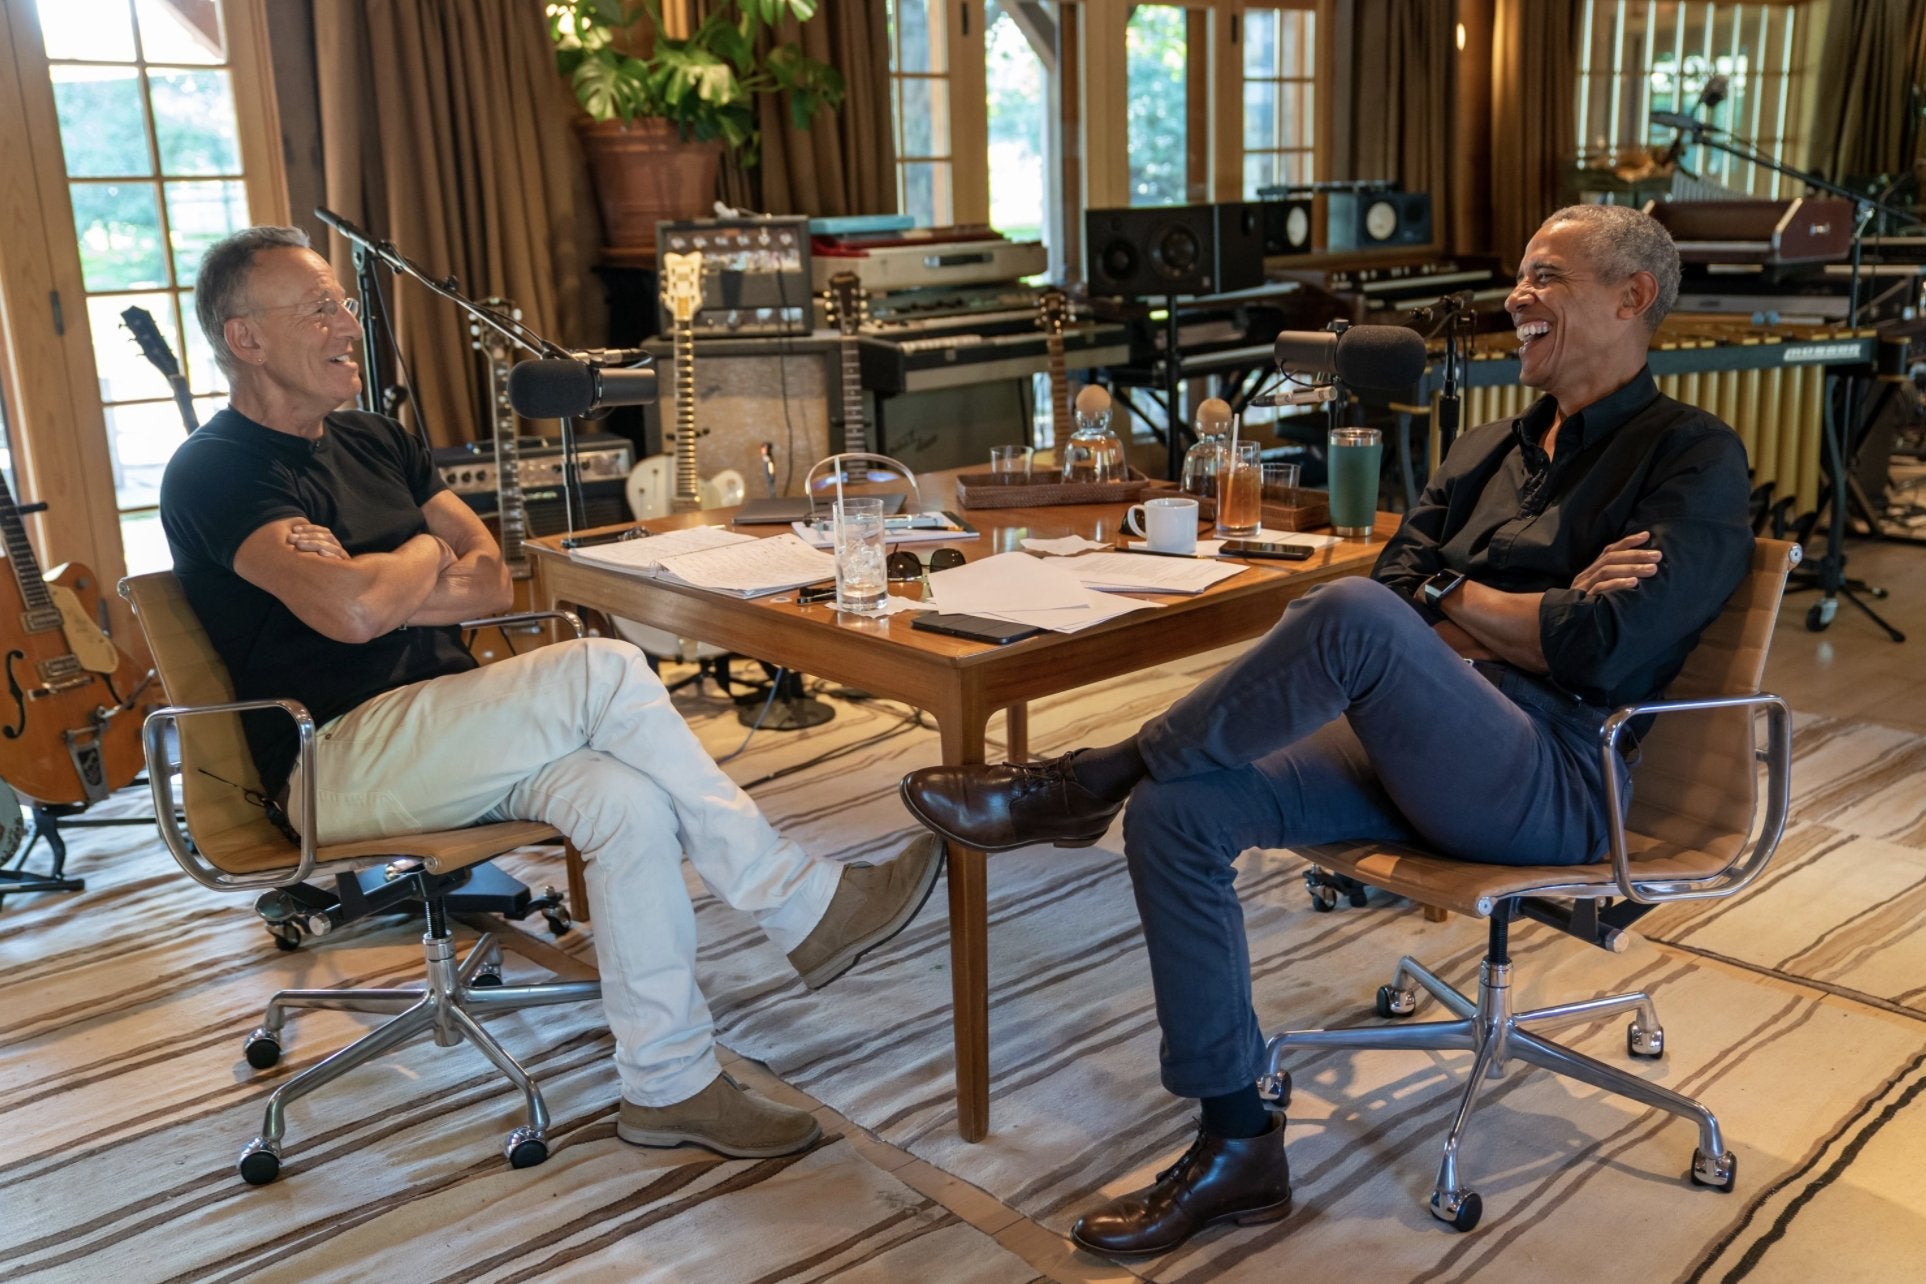 Bruce Springsteen and Barack Obama sit facing each other at a table covered in many beverages and papers. They are smiling into recording microphones. There are many musical instruments behind them.